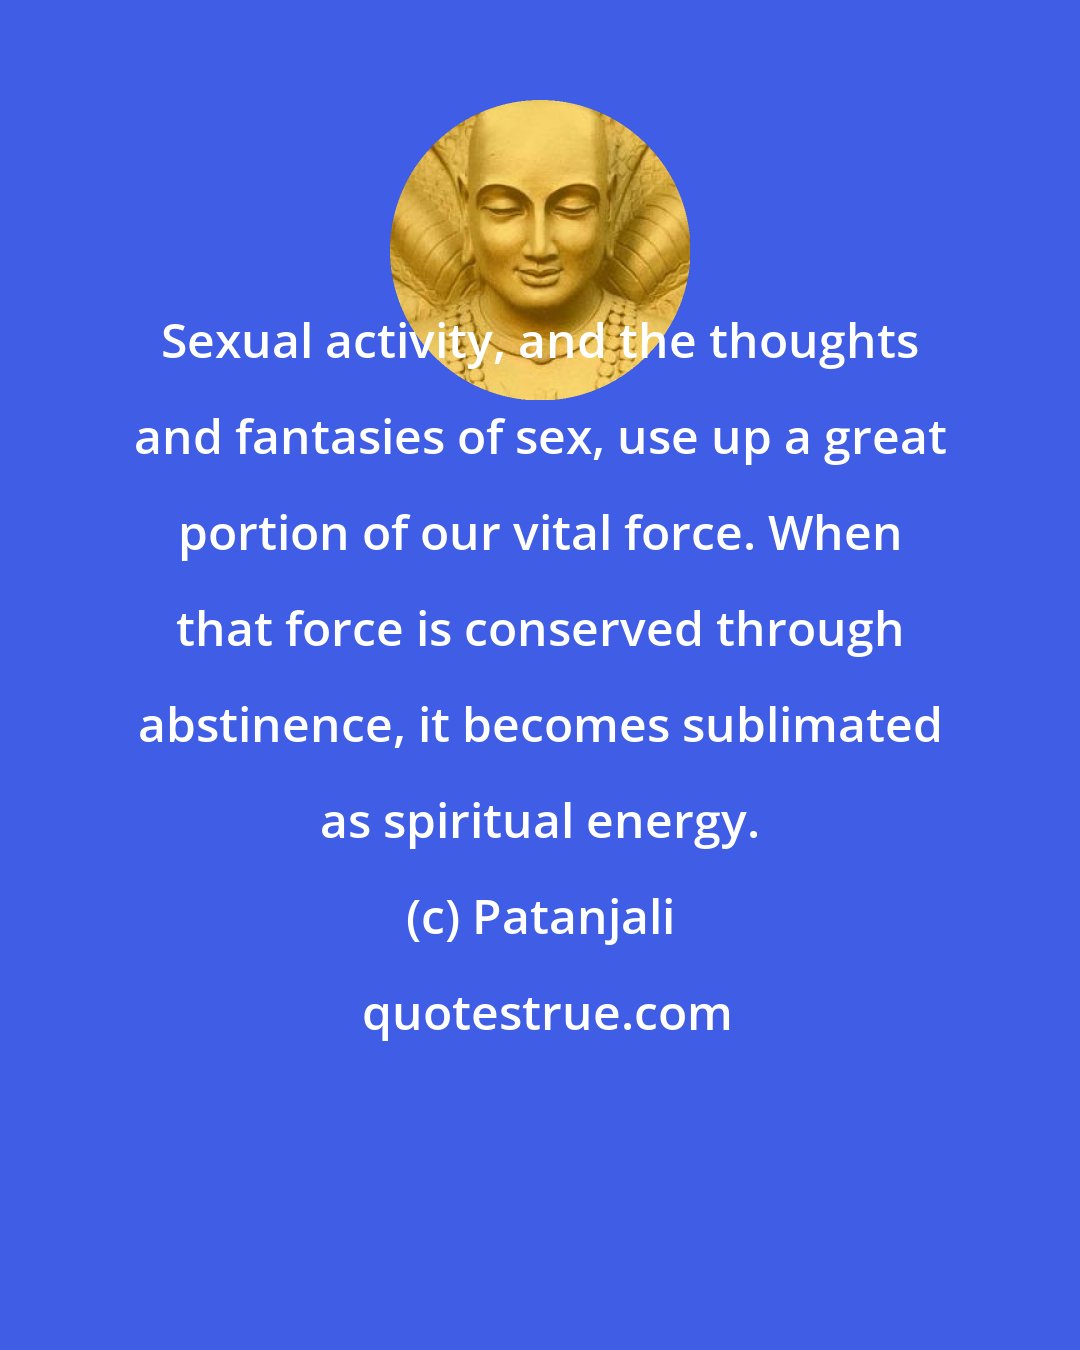 Patanjali: Sexual activity, and the thoughts and fantasies of sex, use up a great portion of our vital force. When that force is conserved through abstinence, it becomes sublimated as spiritual energy.